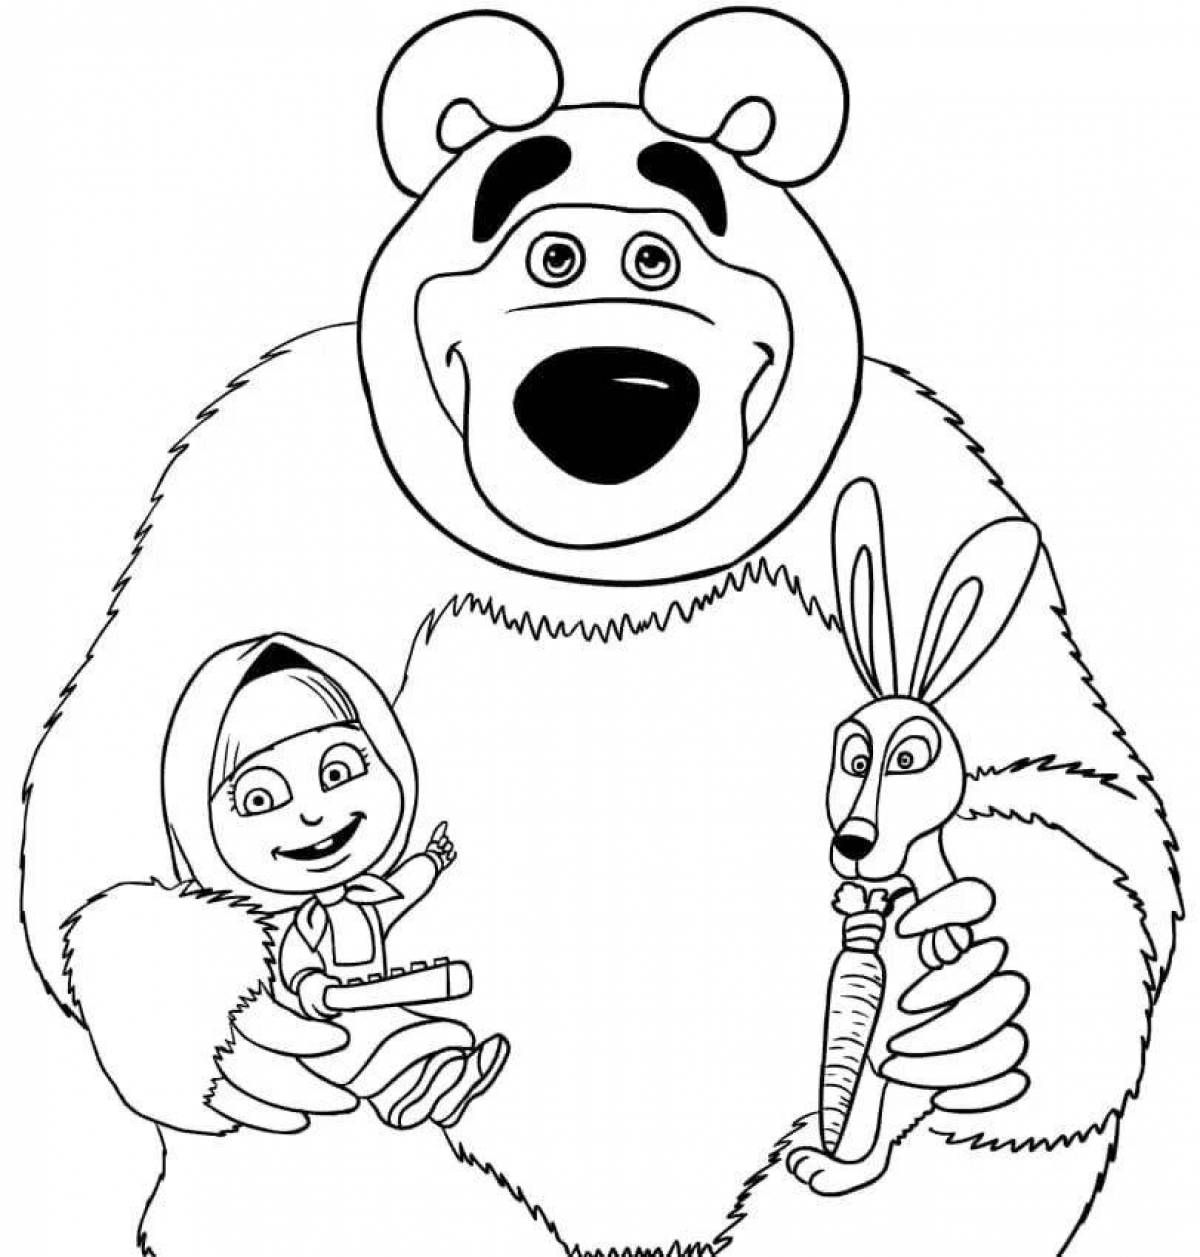 Coloring book glowing Masha and the bear